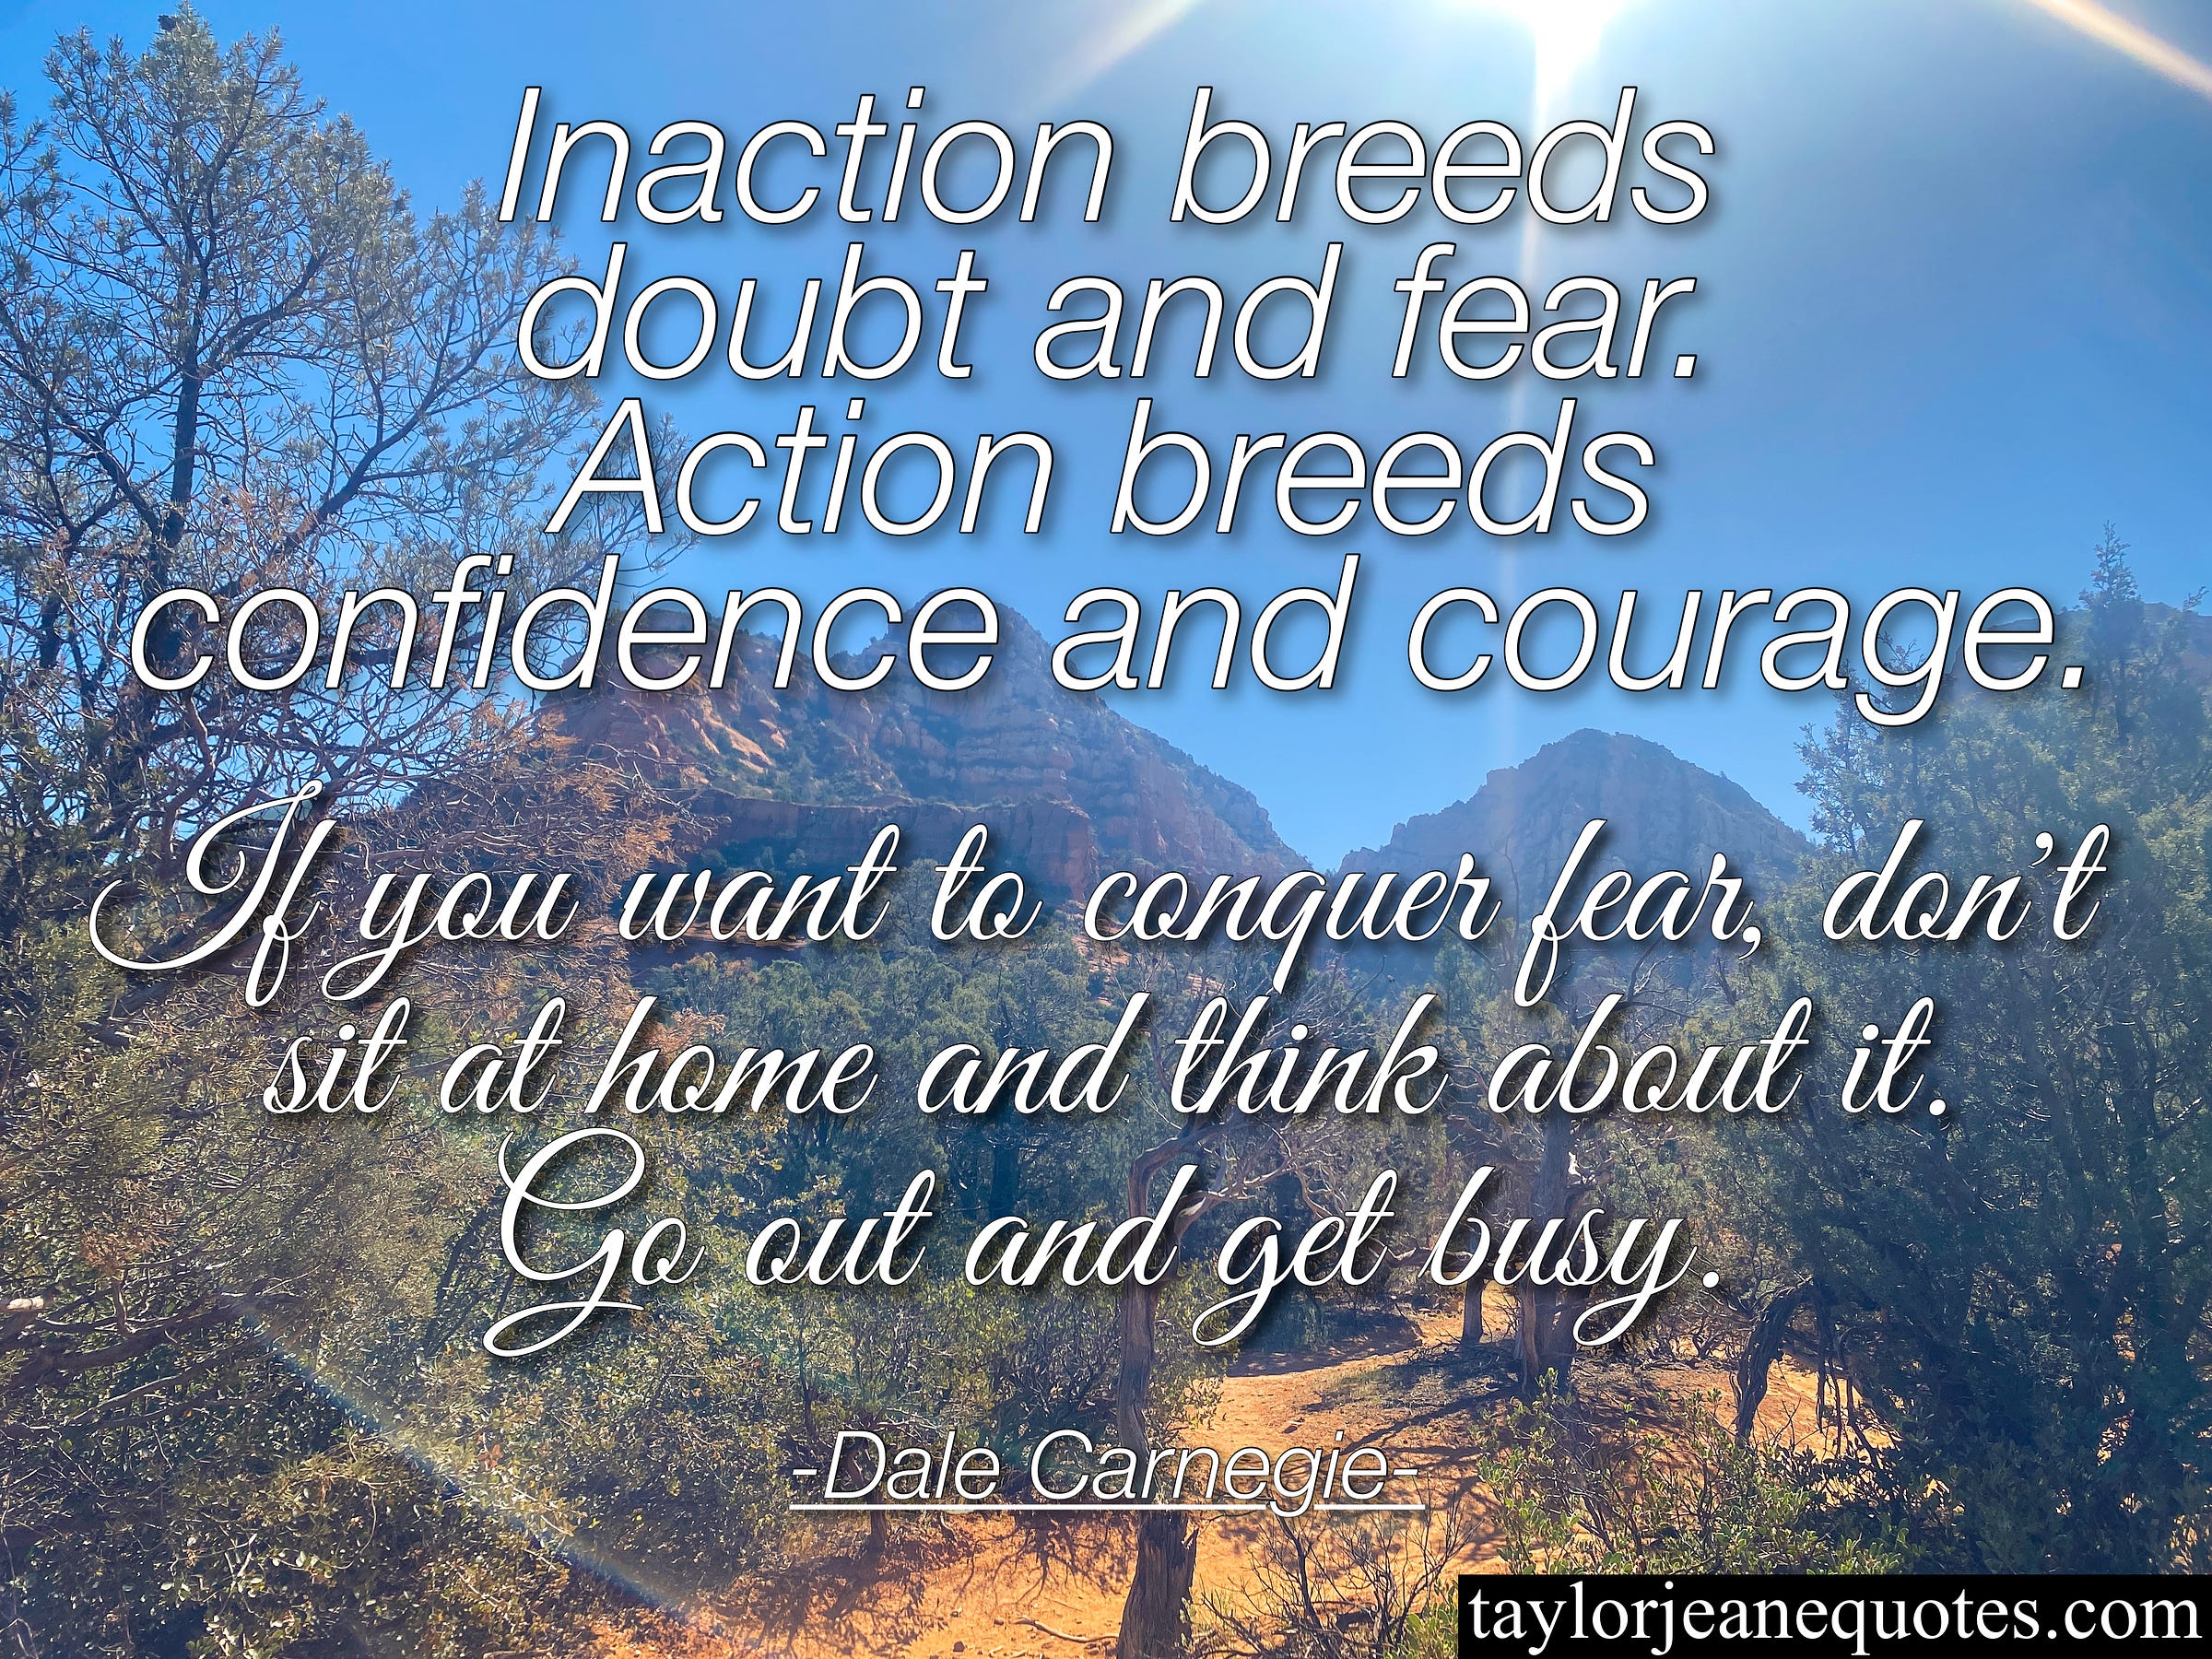 taylor jeane quotes, taylor jeane, taylor wilson, inspirational quotes, motivational quotes, dale carnegie, dale carnegie quotes, small business quote of the day email subscription, inaction quotes, action quotes, doubt quotes, overcome doubt quotes, fear quotes, overcoming fear quotes, confidence quotes, courage quotes, get busy quotes, productivity quotes, goal quotes, race car driver quotes, racing quotes, sedona arizona